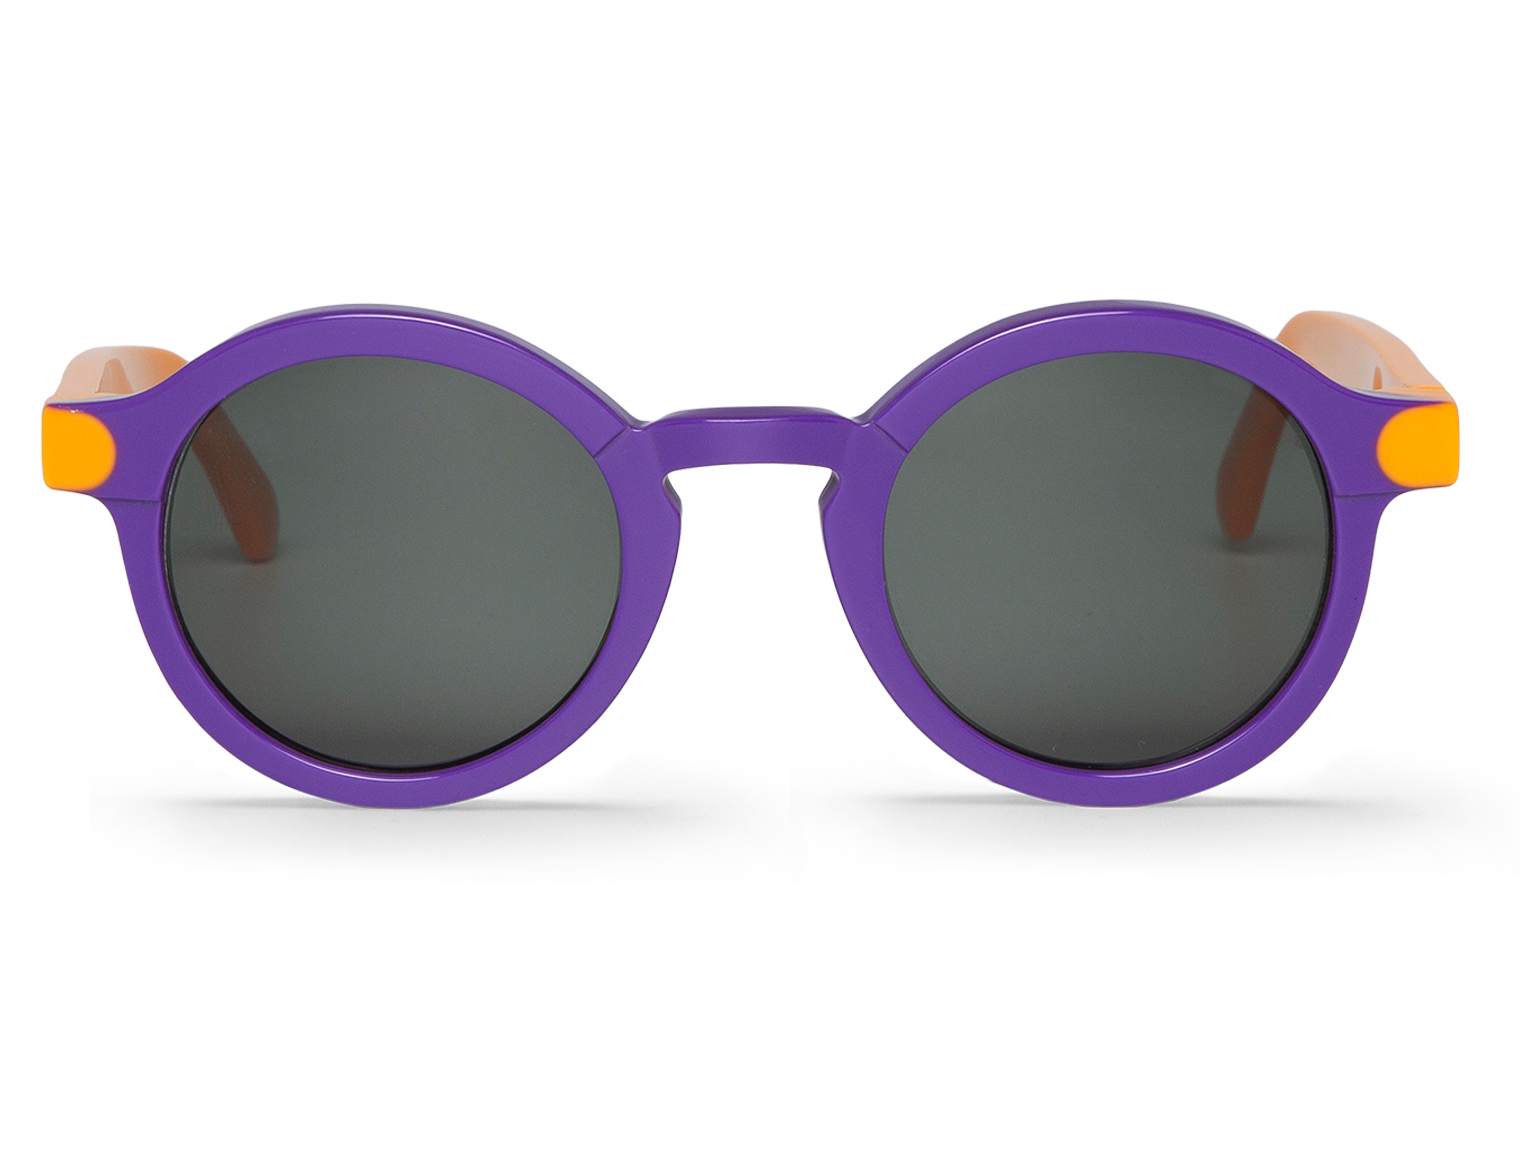 MR BOHO Unconcerned Dalston Sunglasses with Classical Lenses